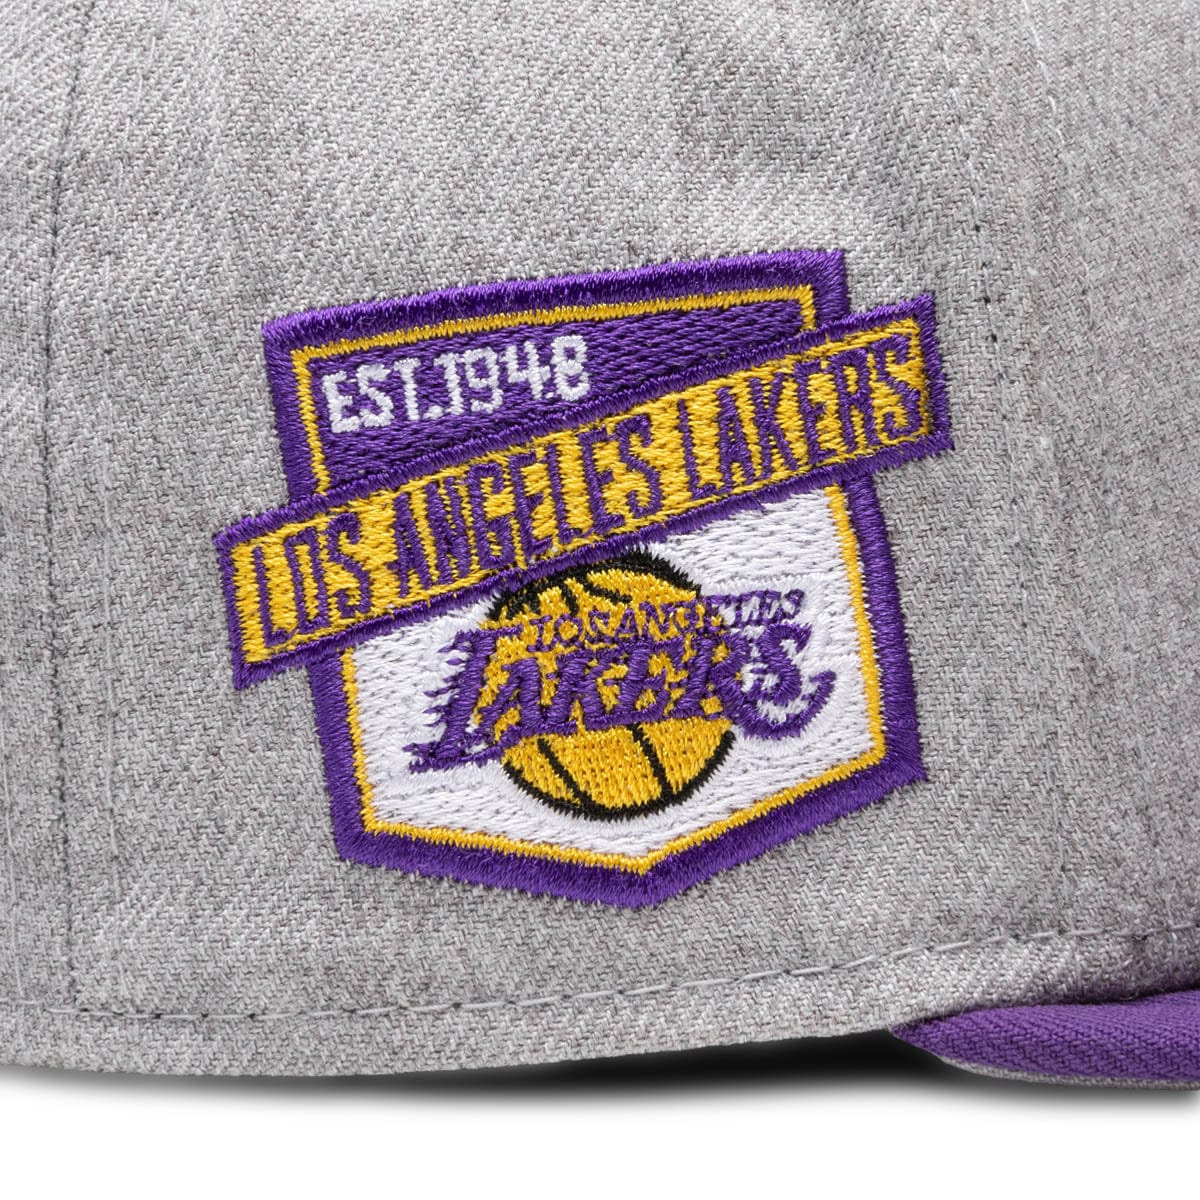 New Era Headwear 59FIFTY HEATHER PATCH LOS ANGELES LAKERS